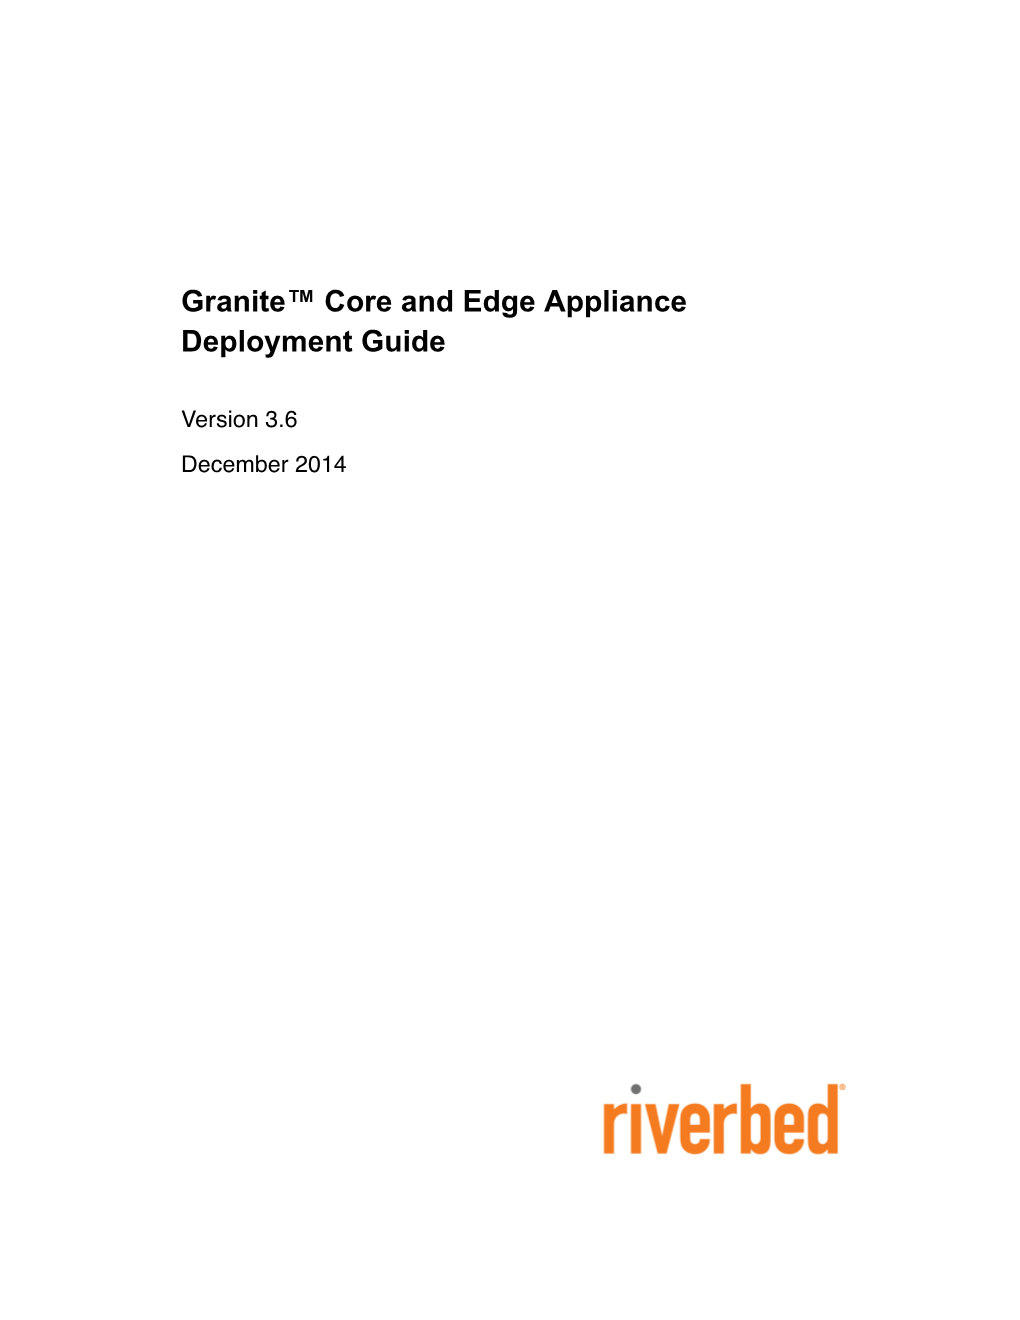 Granite Core and Edge Appliance Deployment Guide December 2014